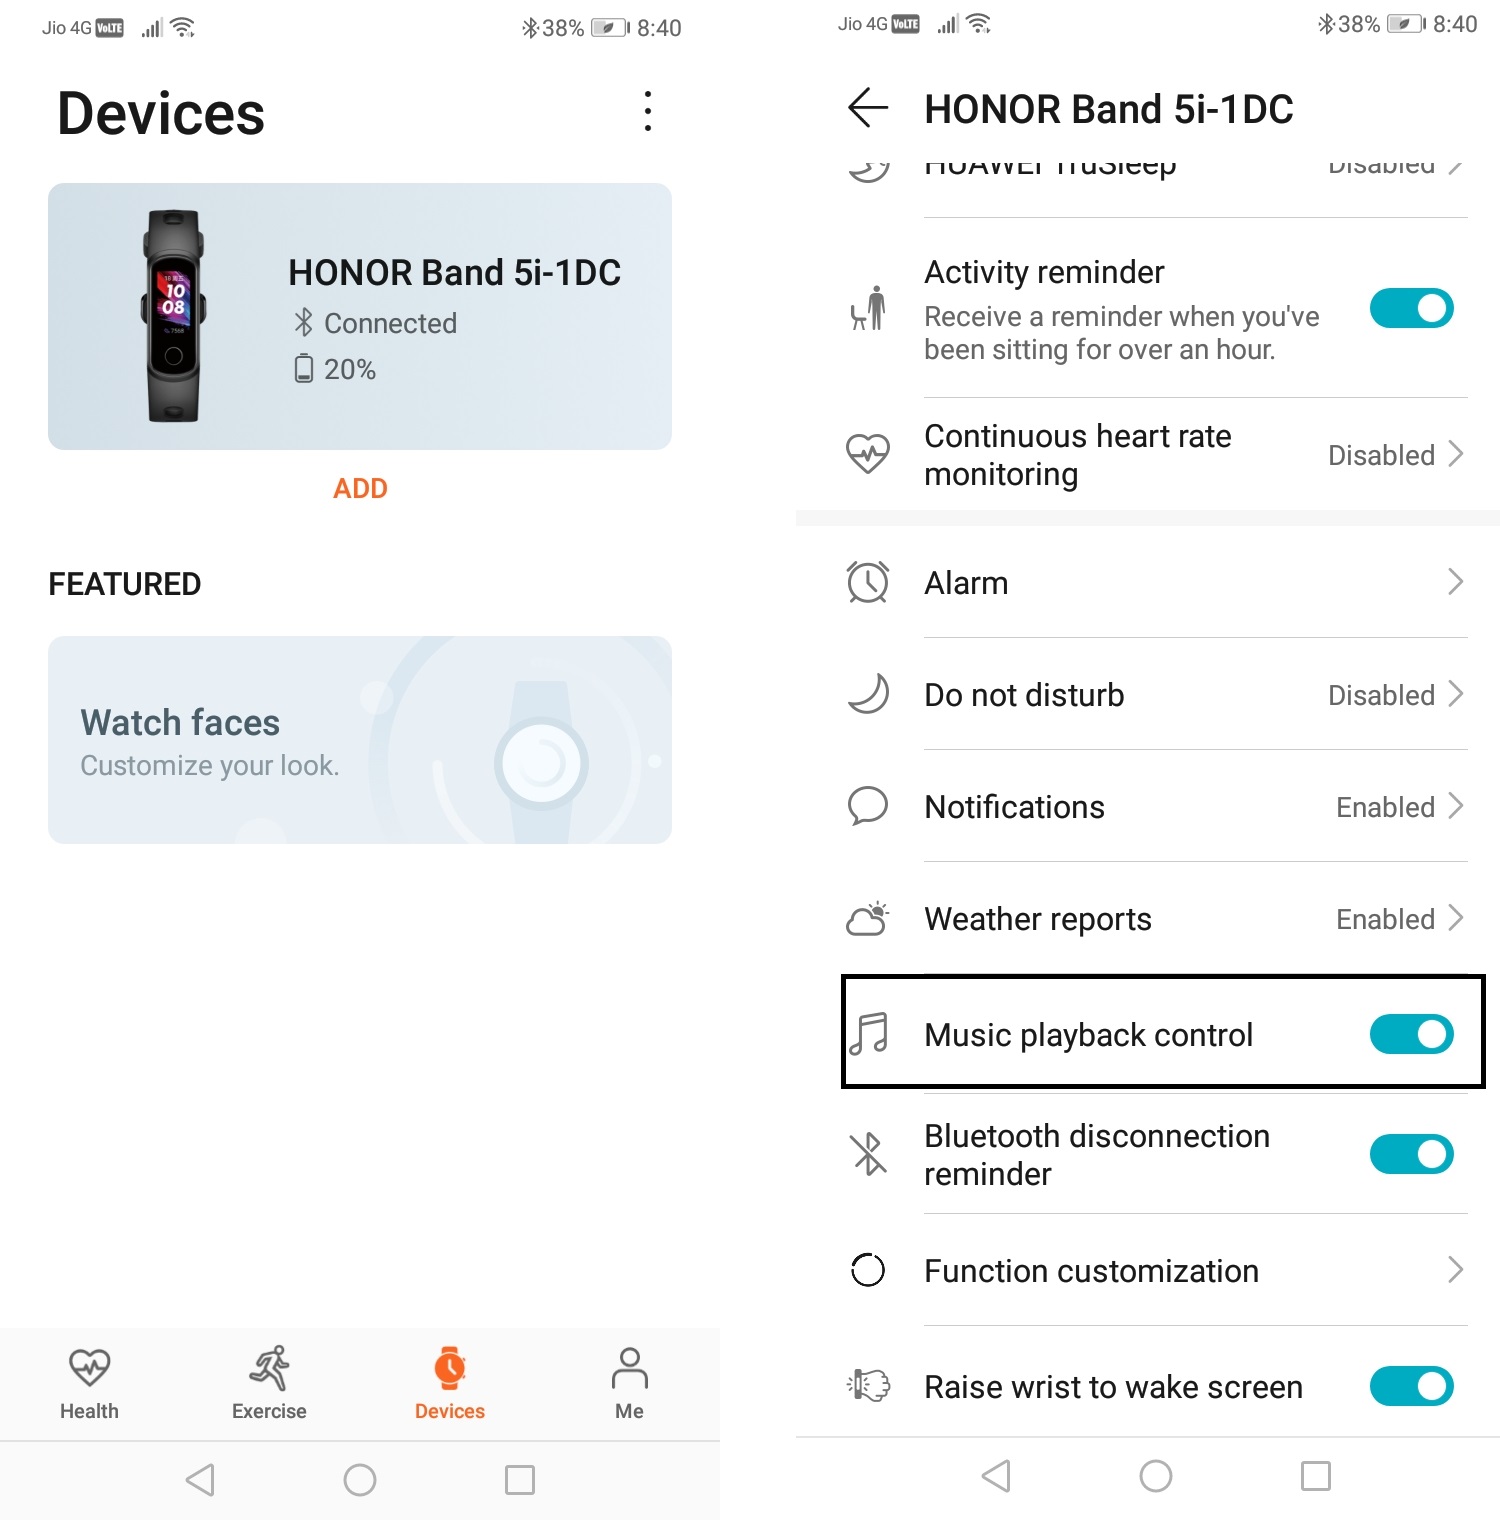 How to enable Music Playback Control in Honor Band 5i